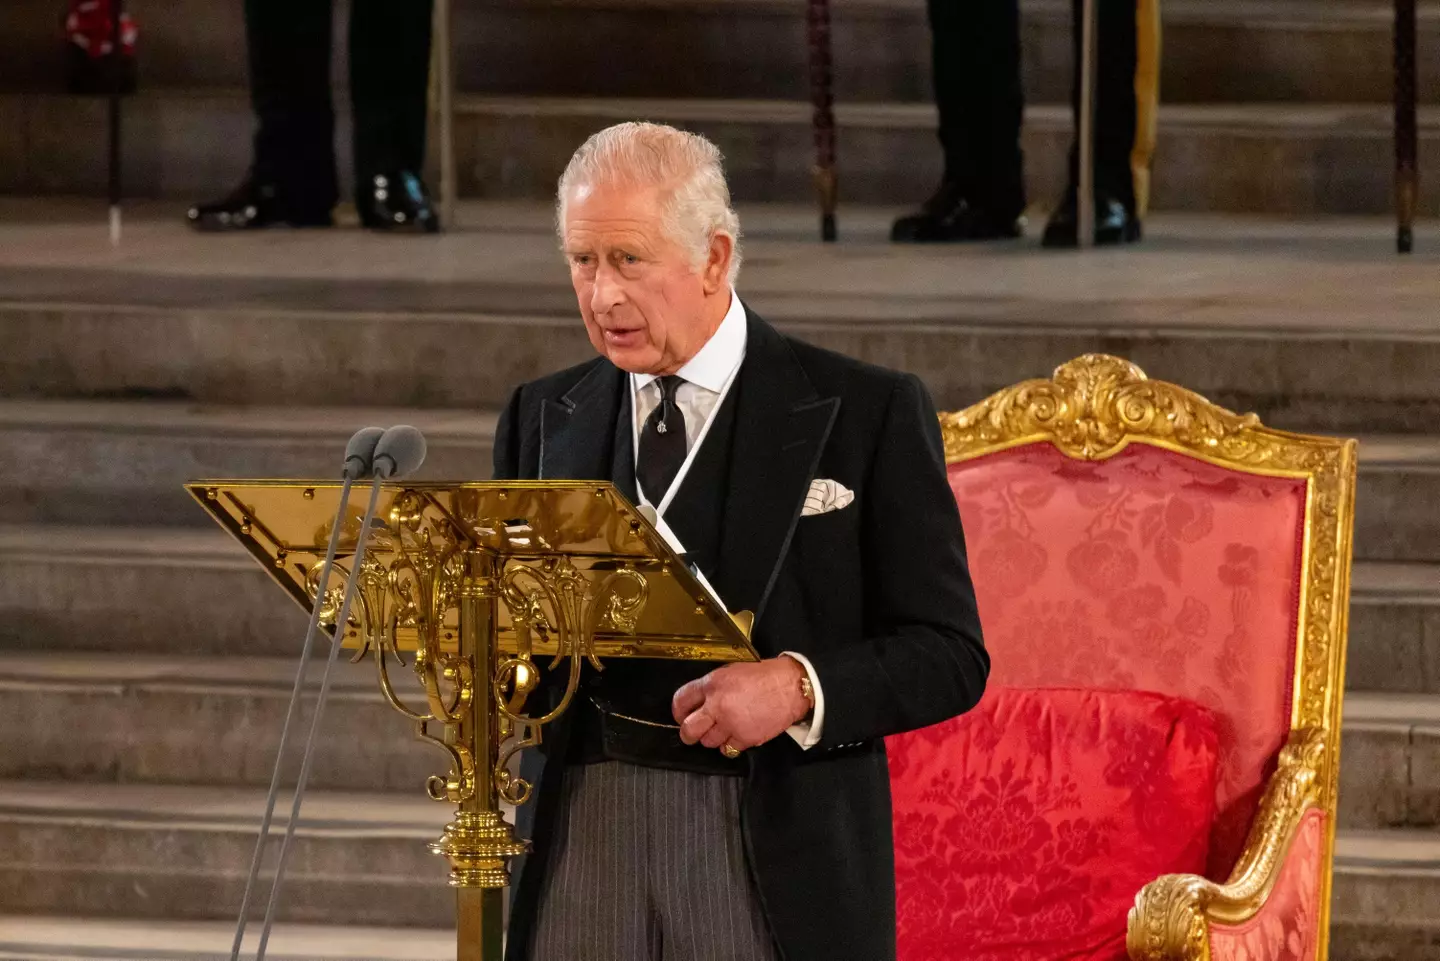 King Charles III's coronation will be broadcast live on Saturday.